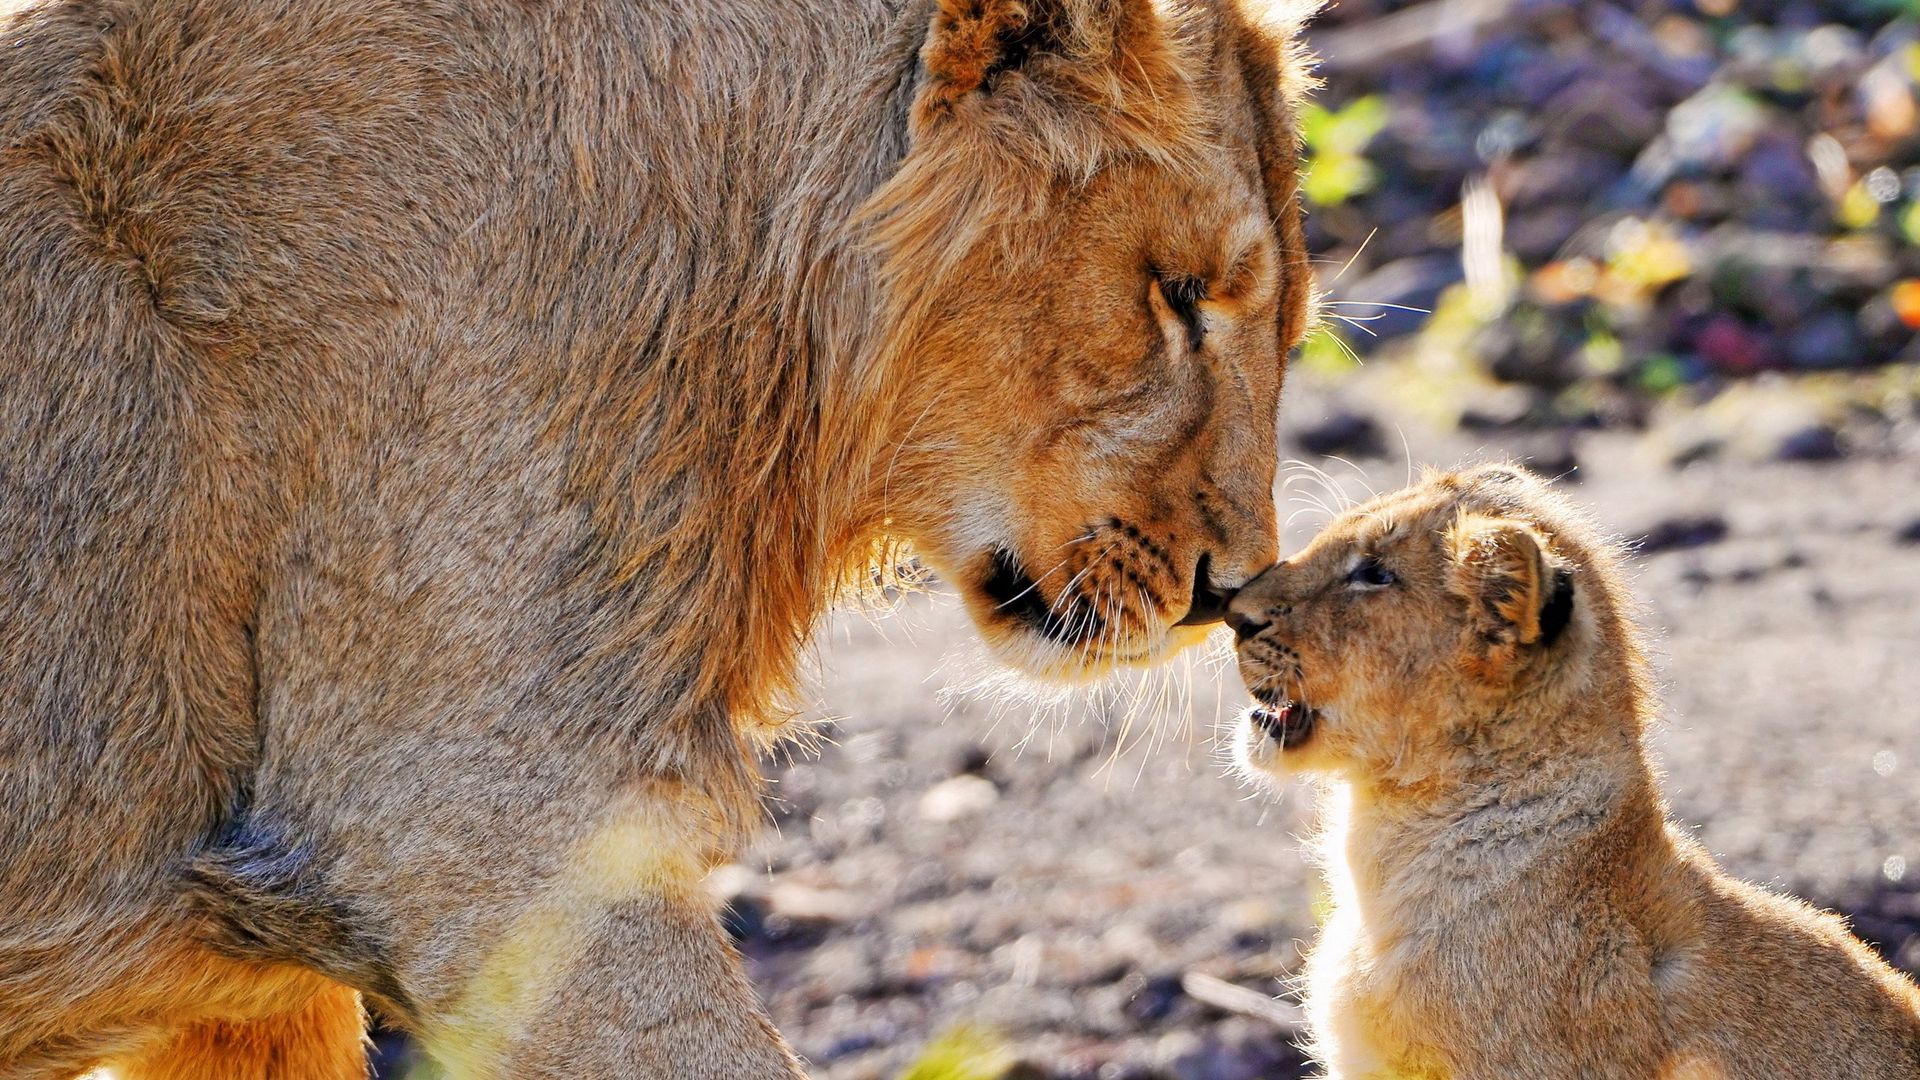 Download wallpaper 1920x1080 lions, couple, baby full hd, hdtv, fhd, 1080p  hd background